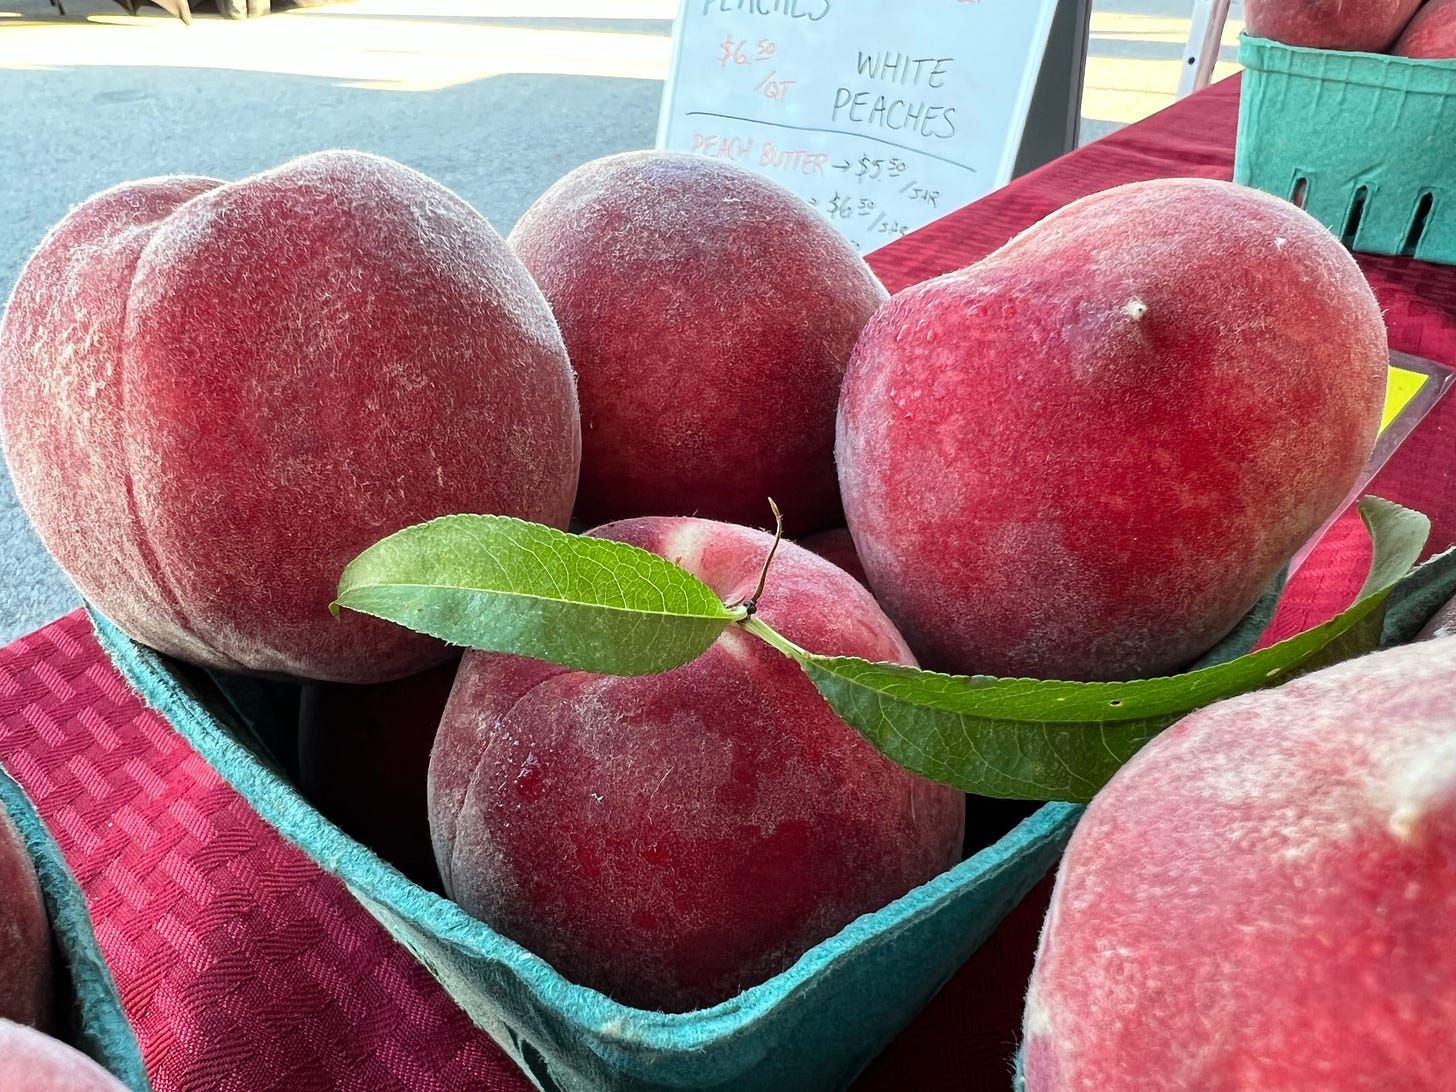 A box of peaches for sale on a table